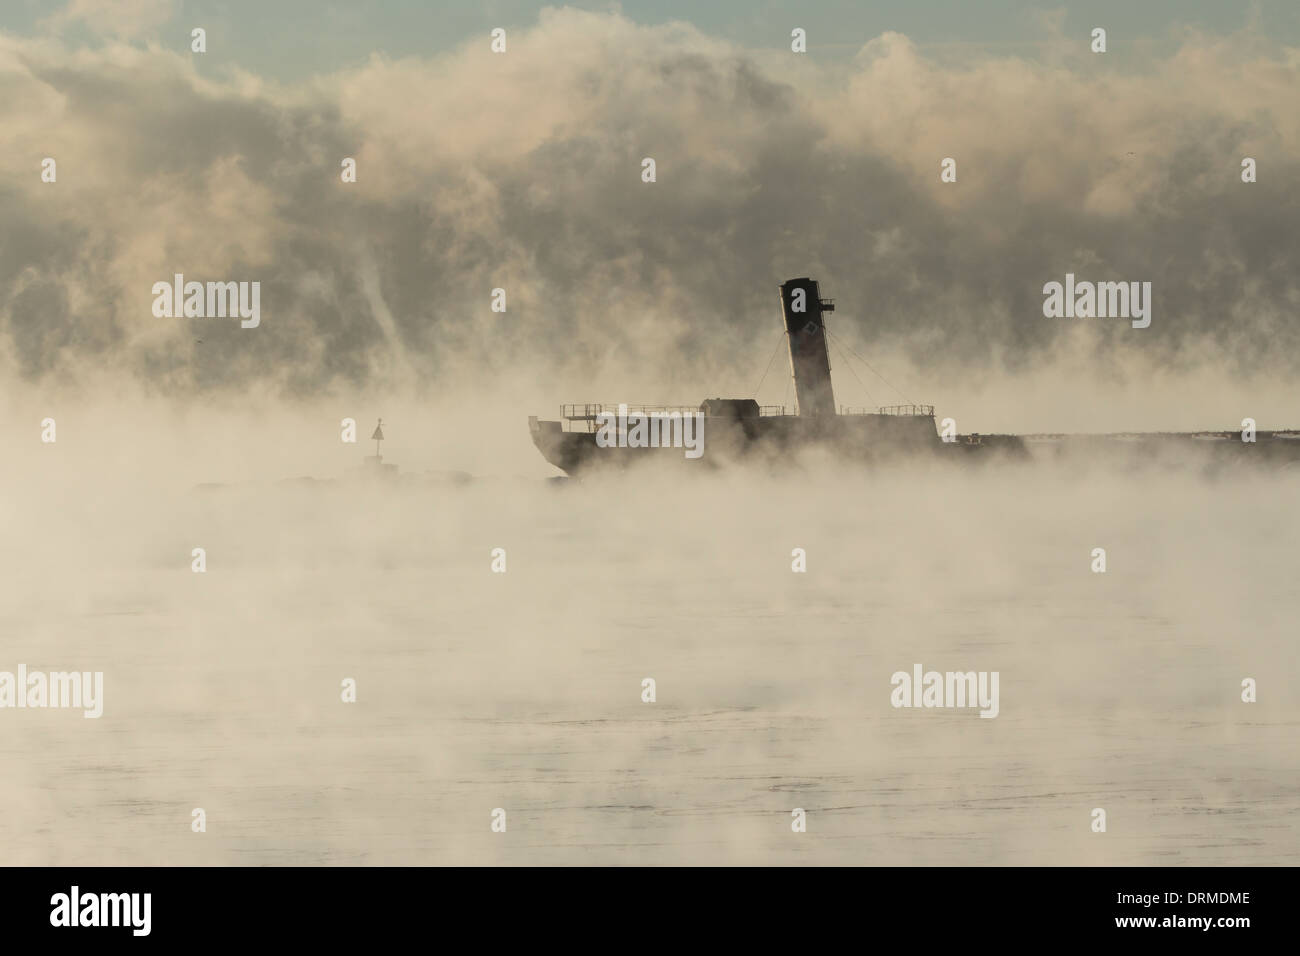 A ship stands in port amidst the steaming waters of Lake Ontario as a steam devil vortex dances in the distance Stock Photo